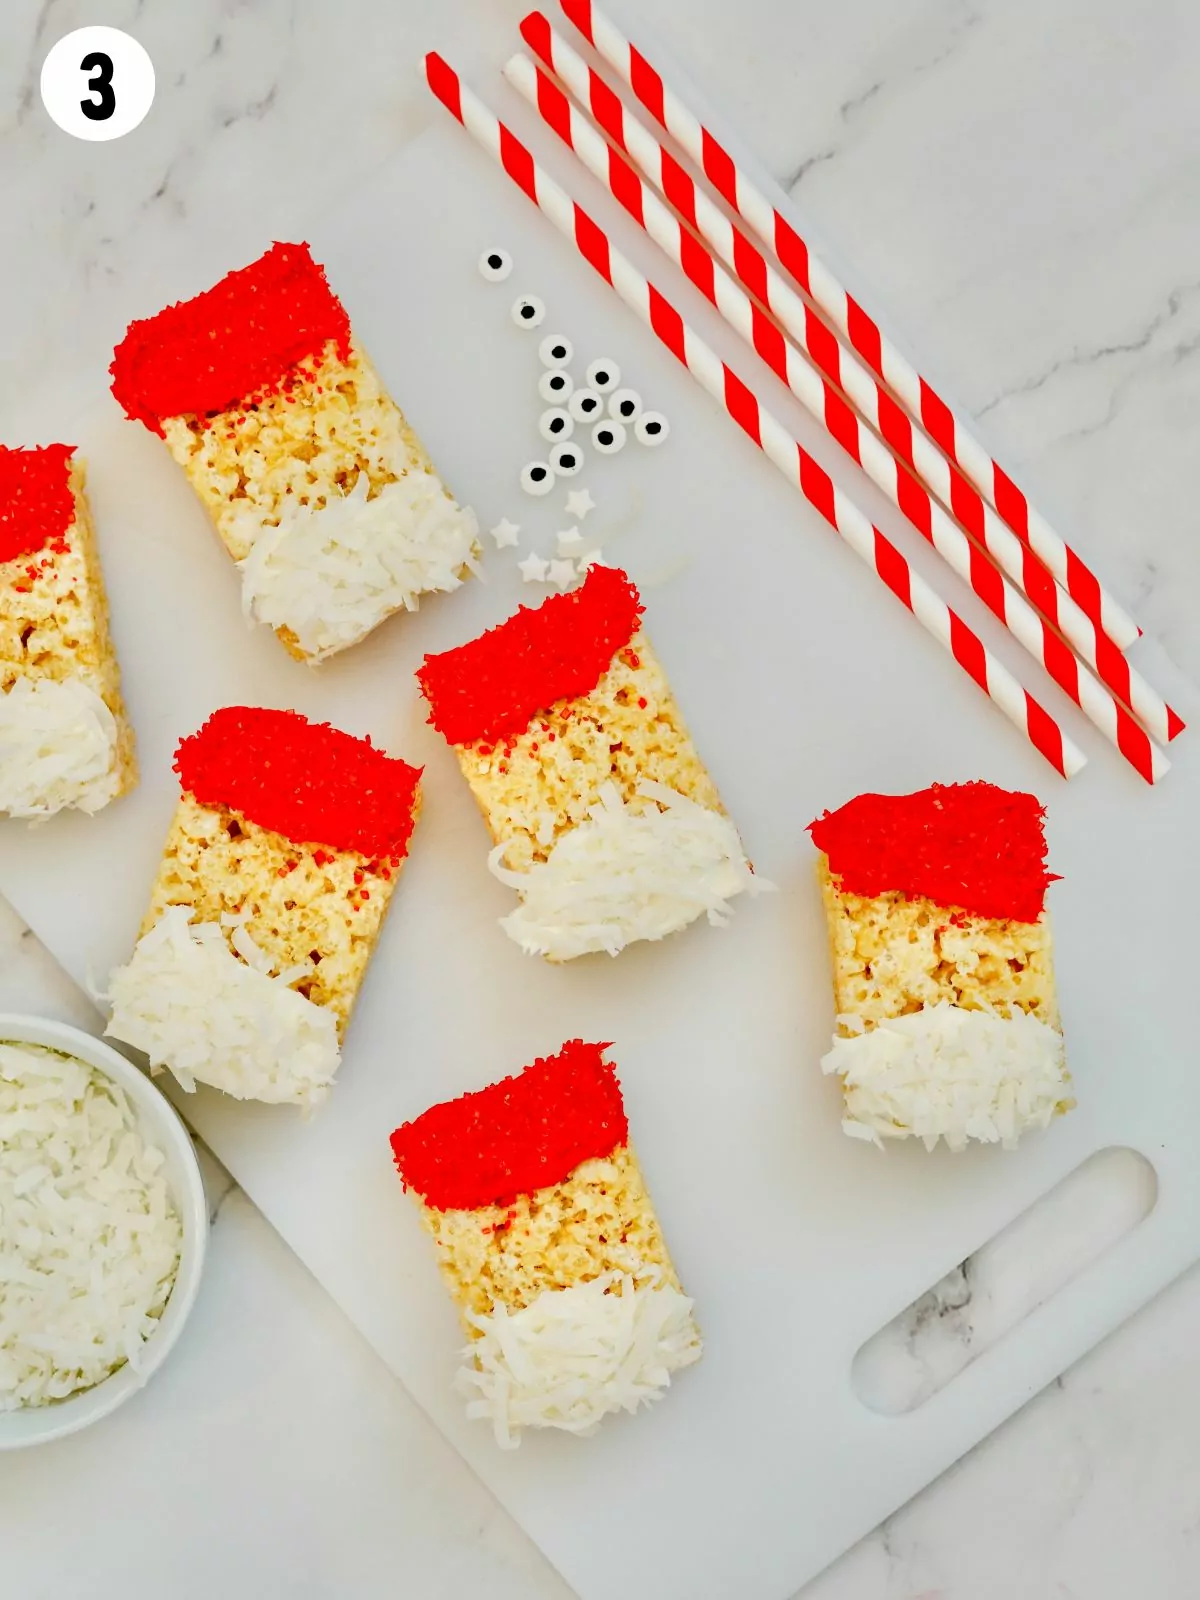 Red frosting and coconut flakes on Rice Krispy Treats.